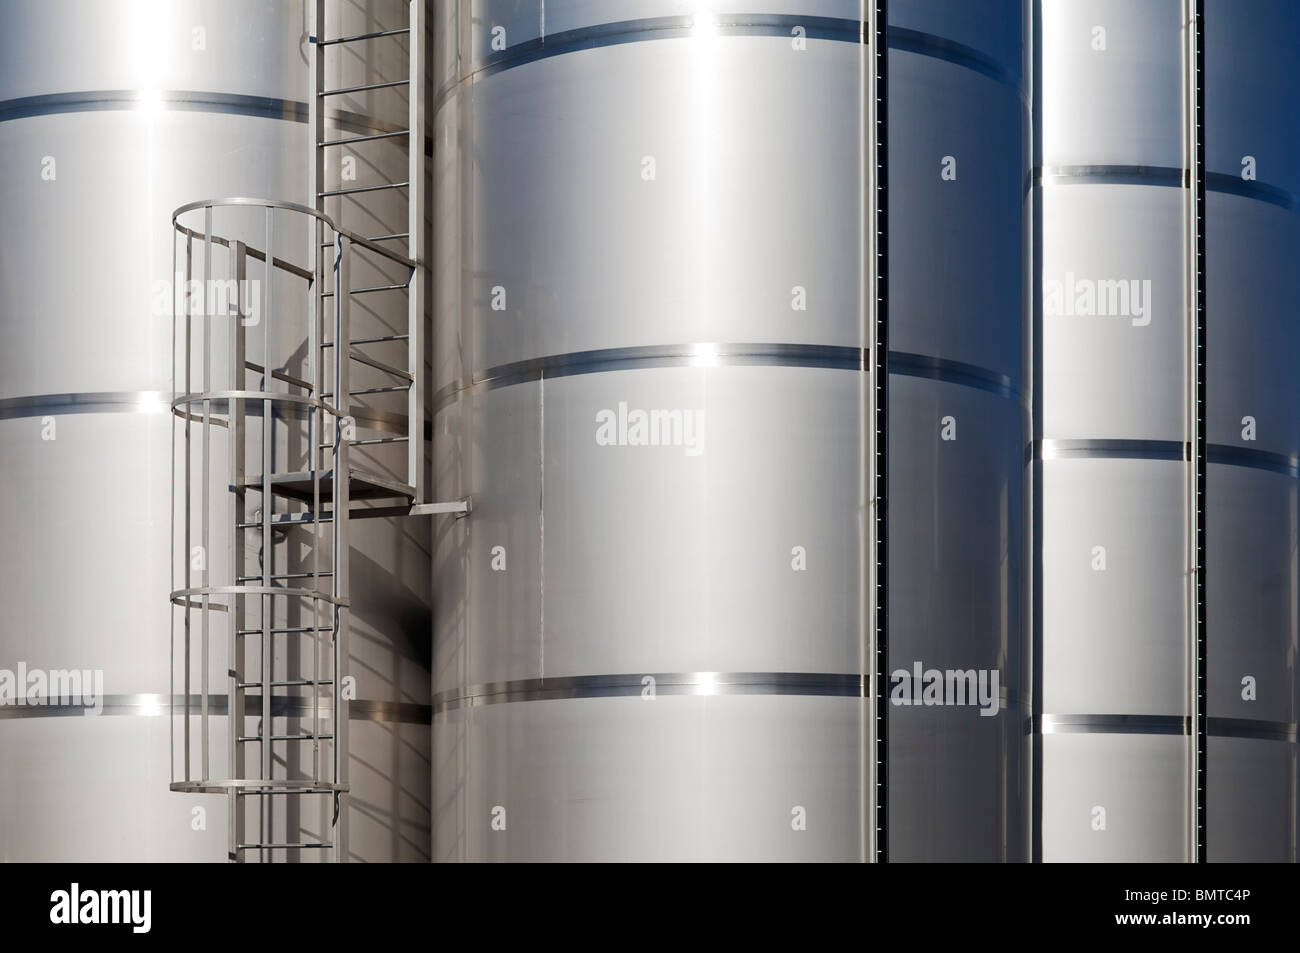 Stainless steel tanks in a modern winery, Alentejo, Portugal Stock Photo